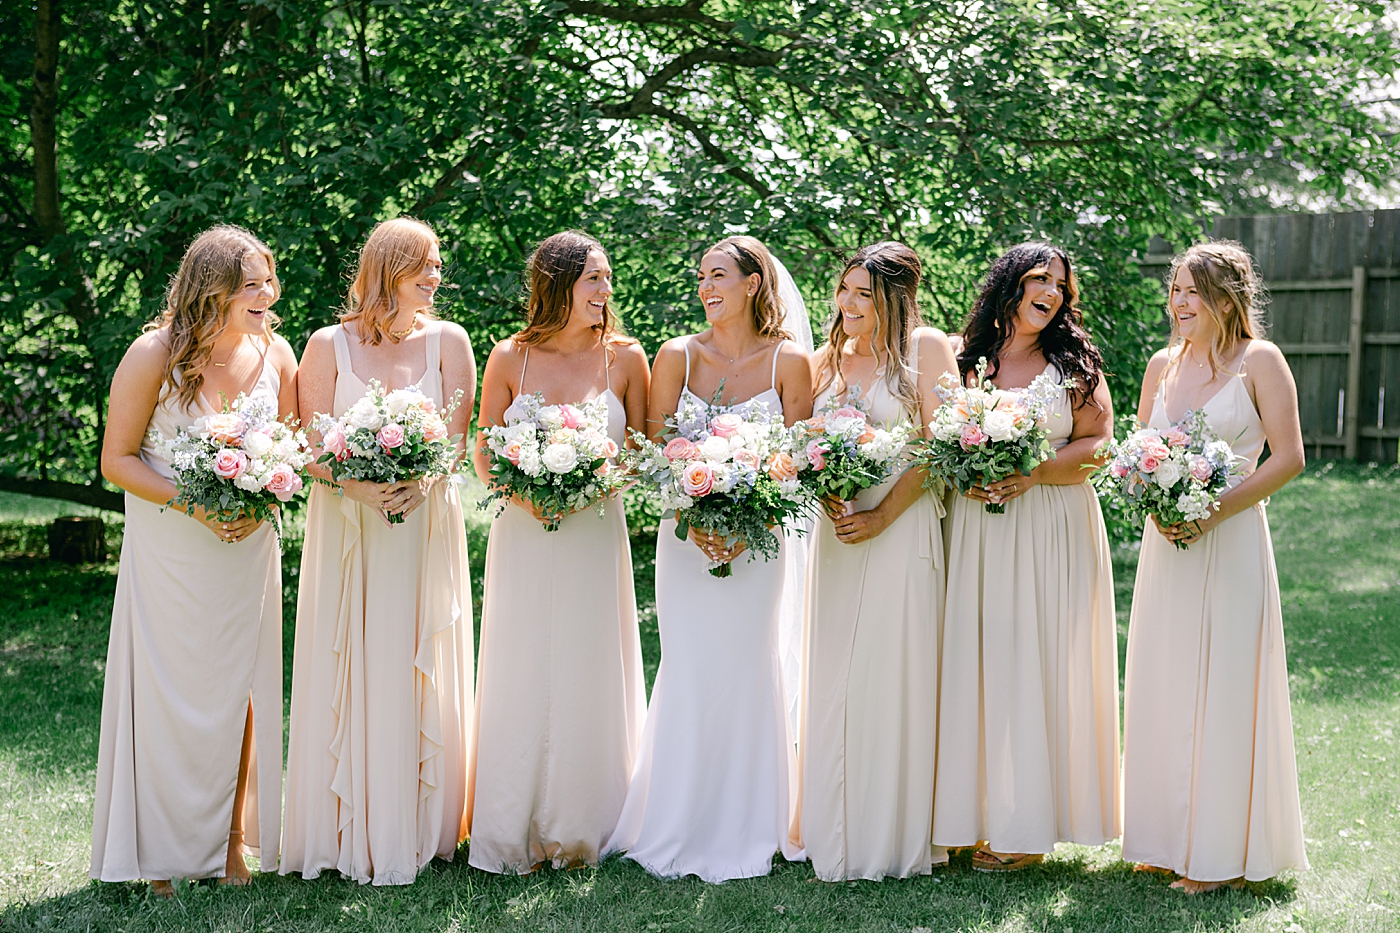 Bride walking with her bridesmaids | Image by Hudson Valley Wedding Photographer Hope Helmuth